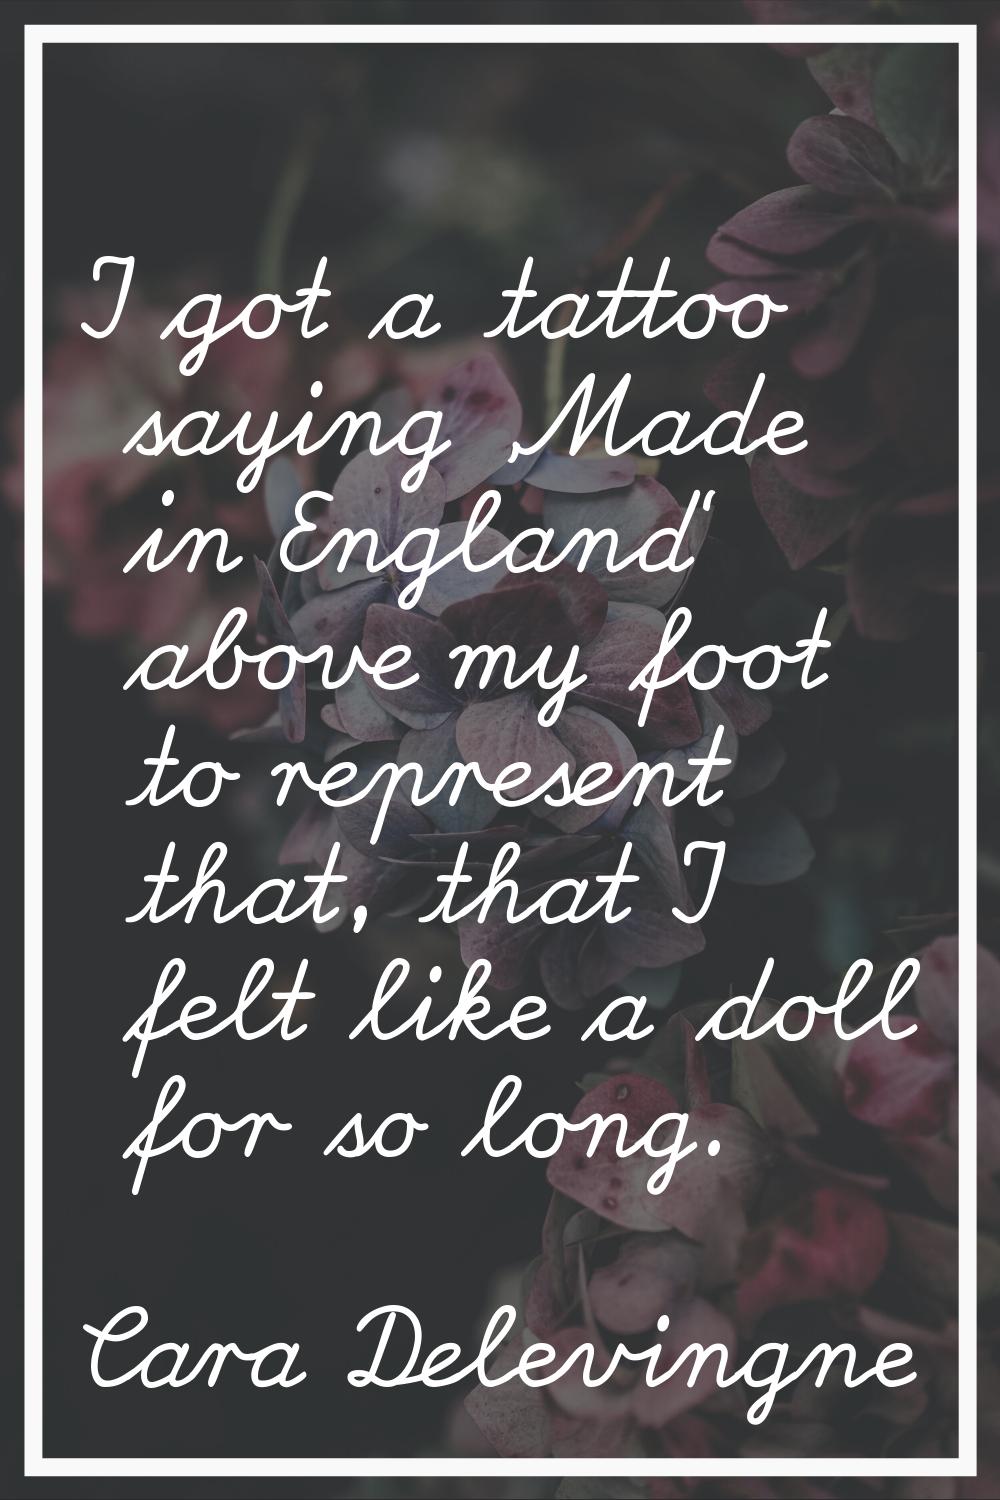 I got a tattoo saying 'Made in England' above my foot to represent that, that I felt like a doll fo